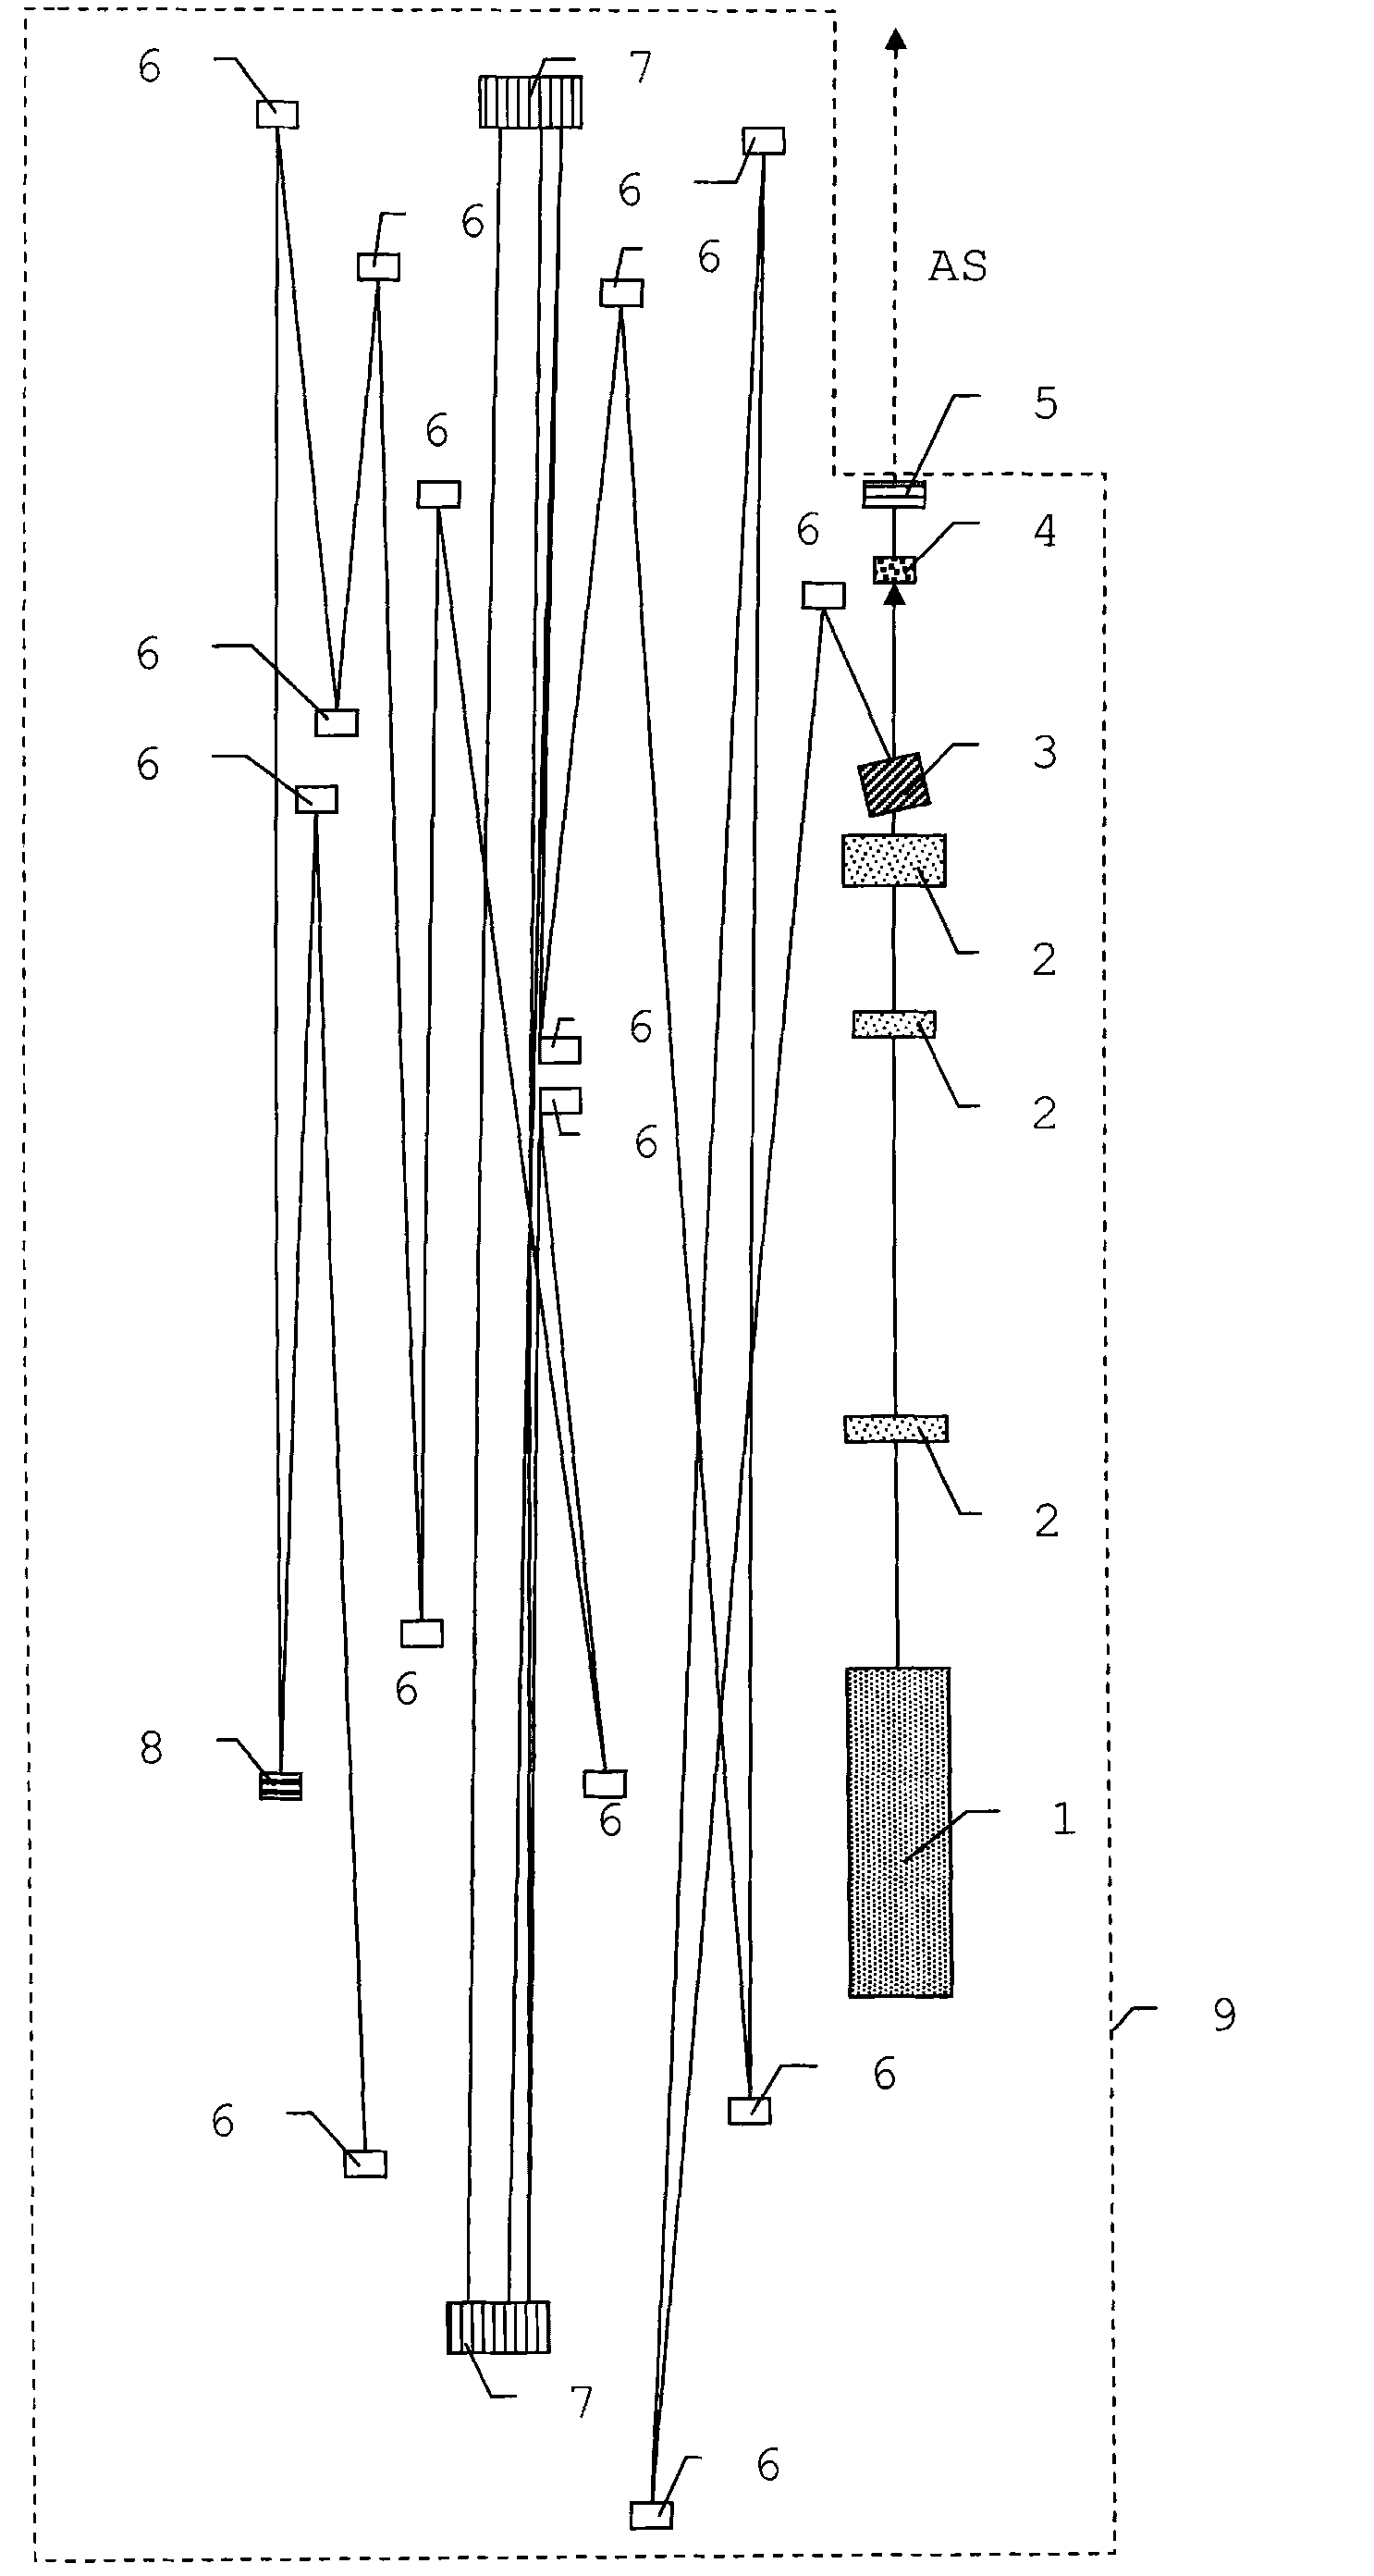 Ultrashort pulse laser system and method for creating femtosecond or picosecond pulses